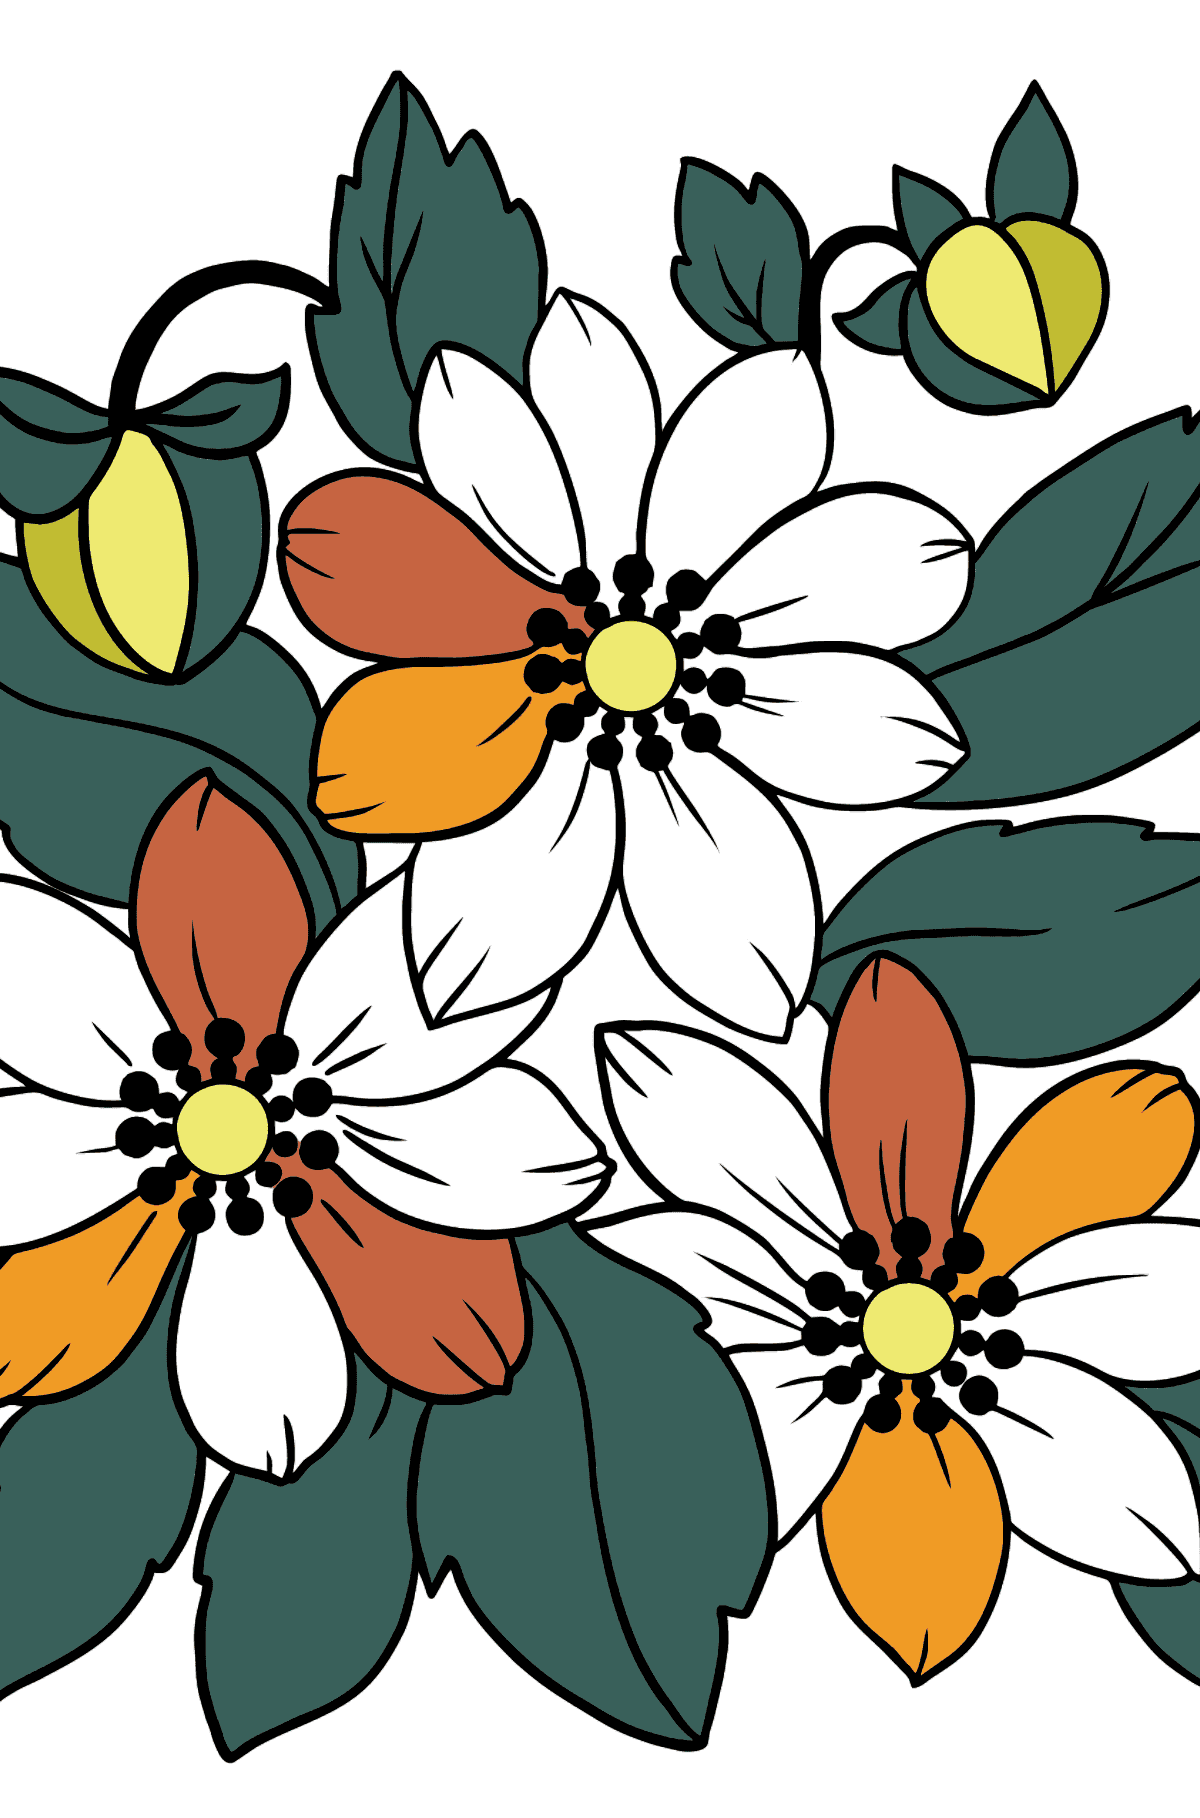 Flower Coloring Page - A Tricolor Anemone - Coloring Pages for Kids